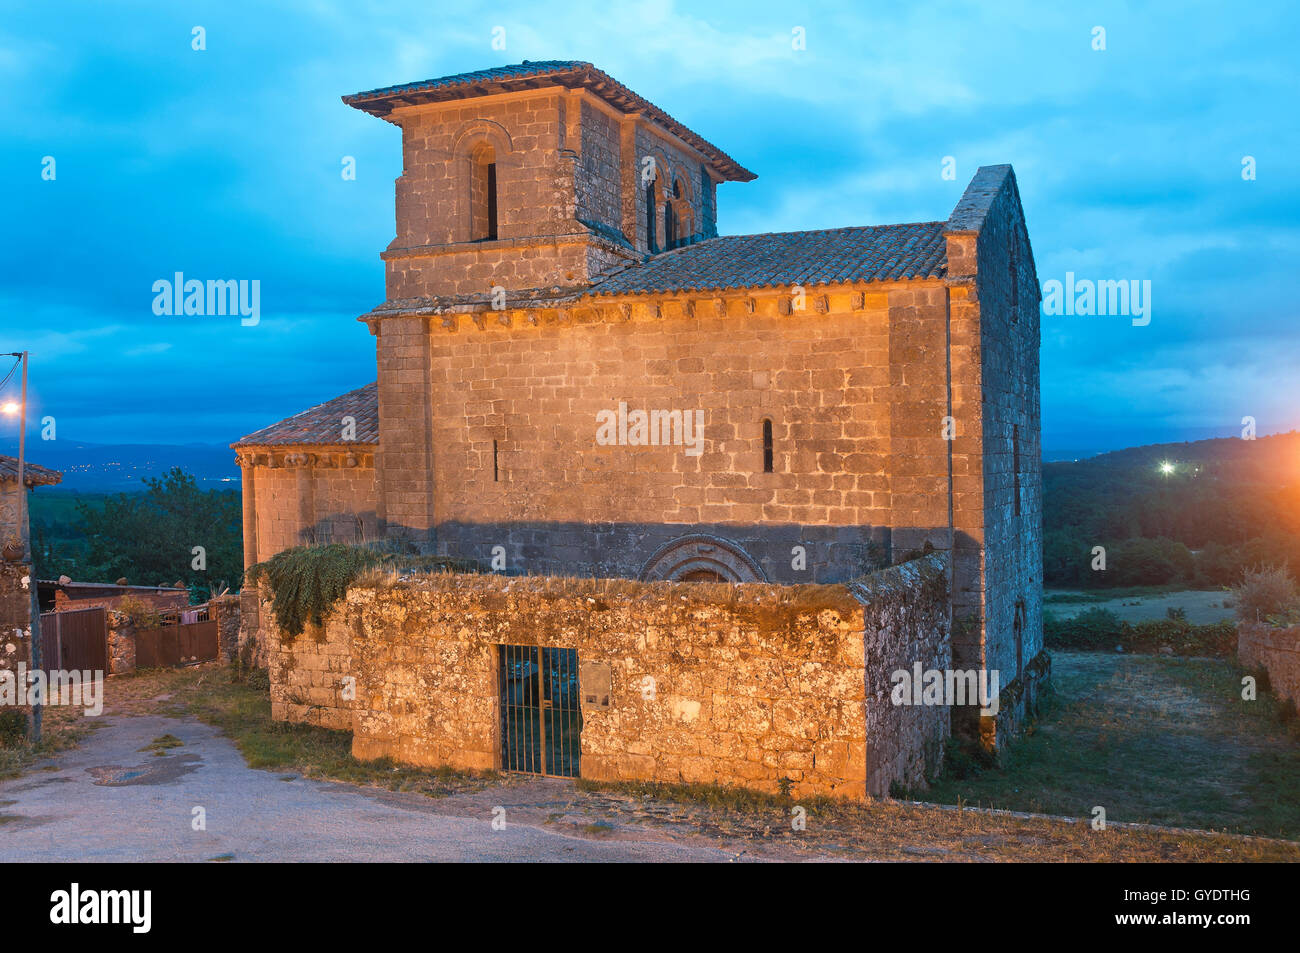 Church of the romanesque monastery of San Miguel-12th century, Eire, Lugo province, Region of Galicia, Spain, Europe Stock Photo